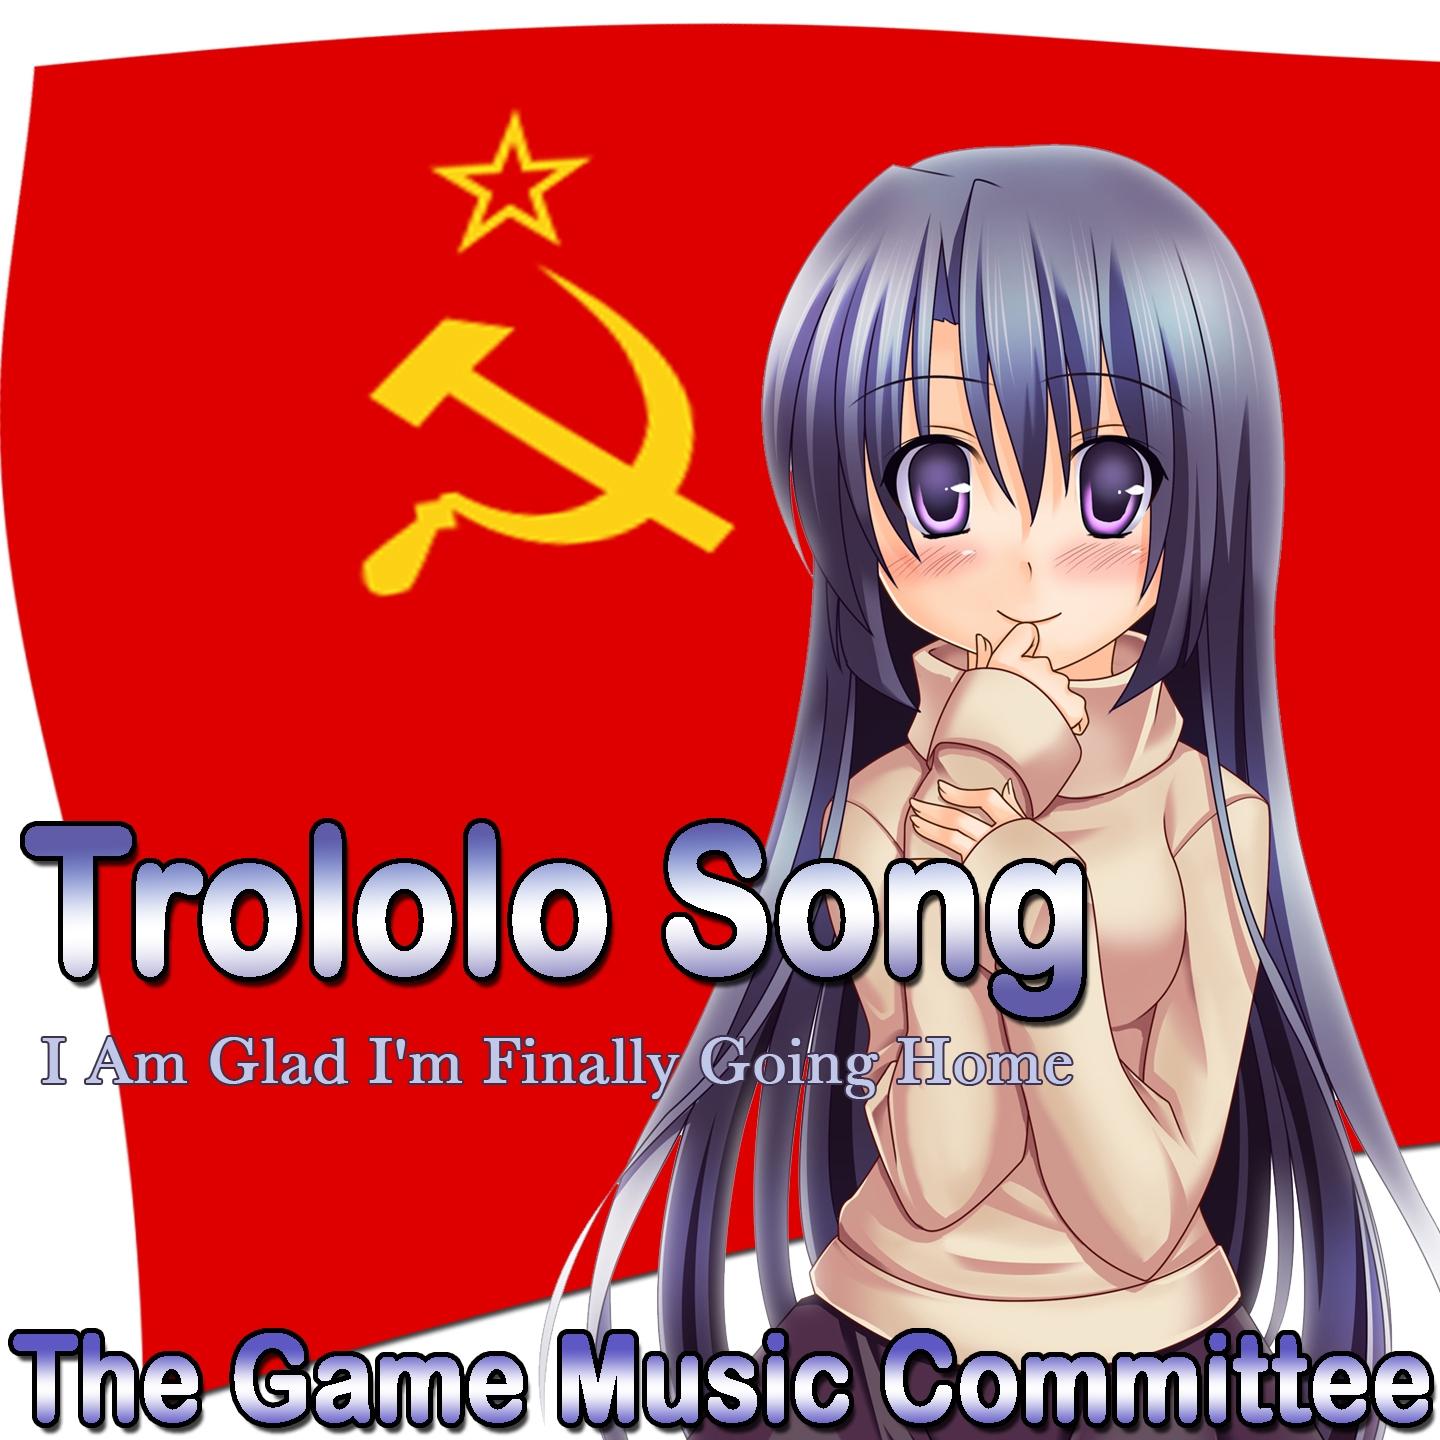 Trololo Song (I Am Glad I'm Finally Going Home)